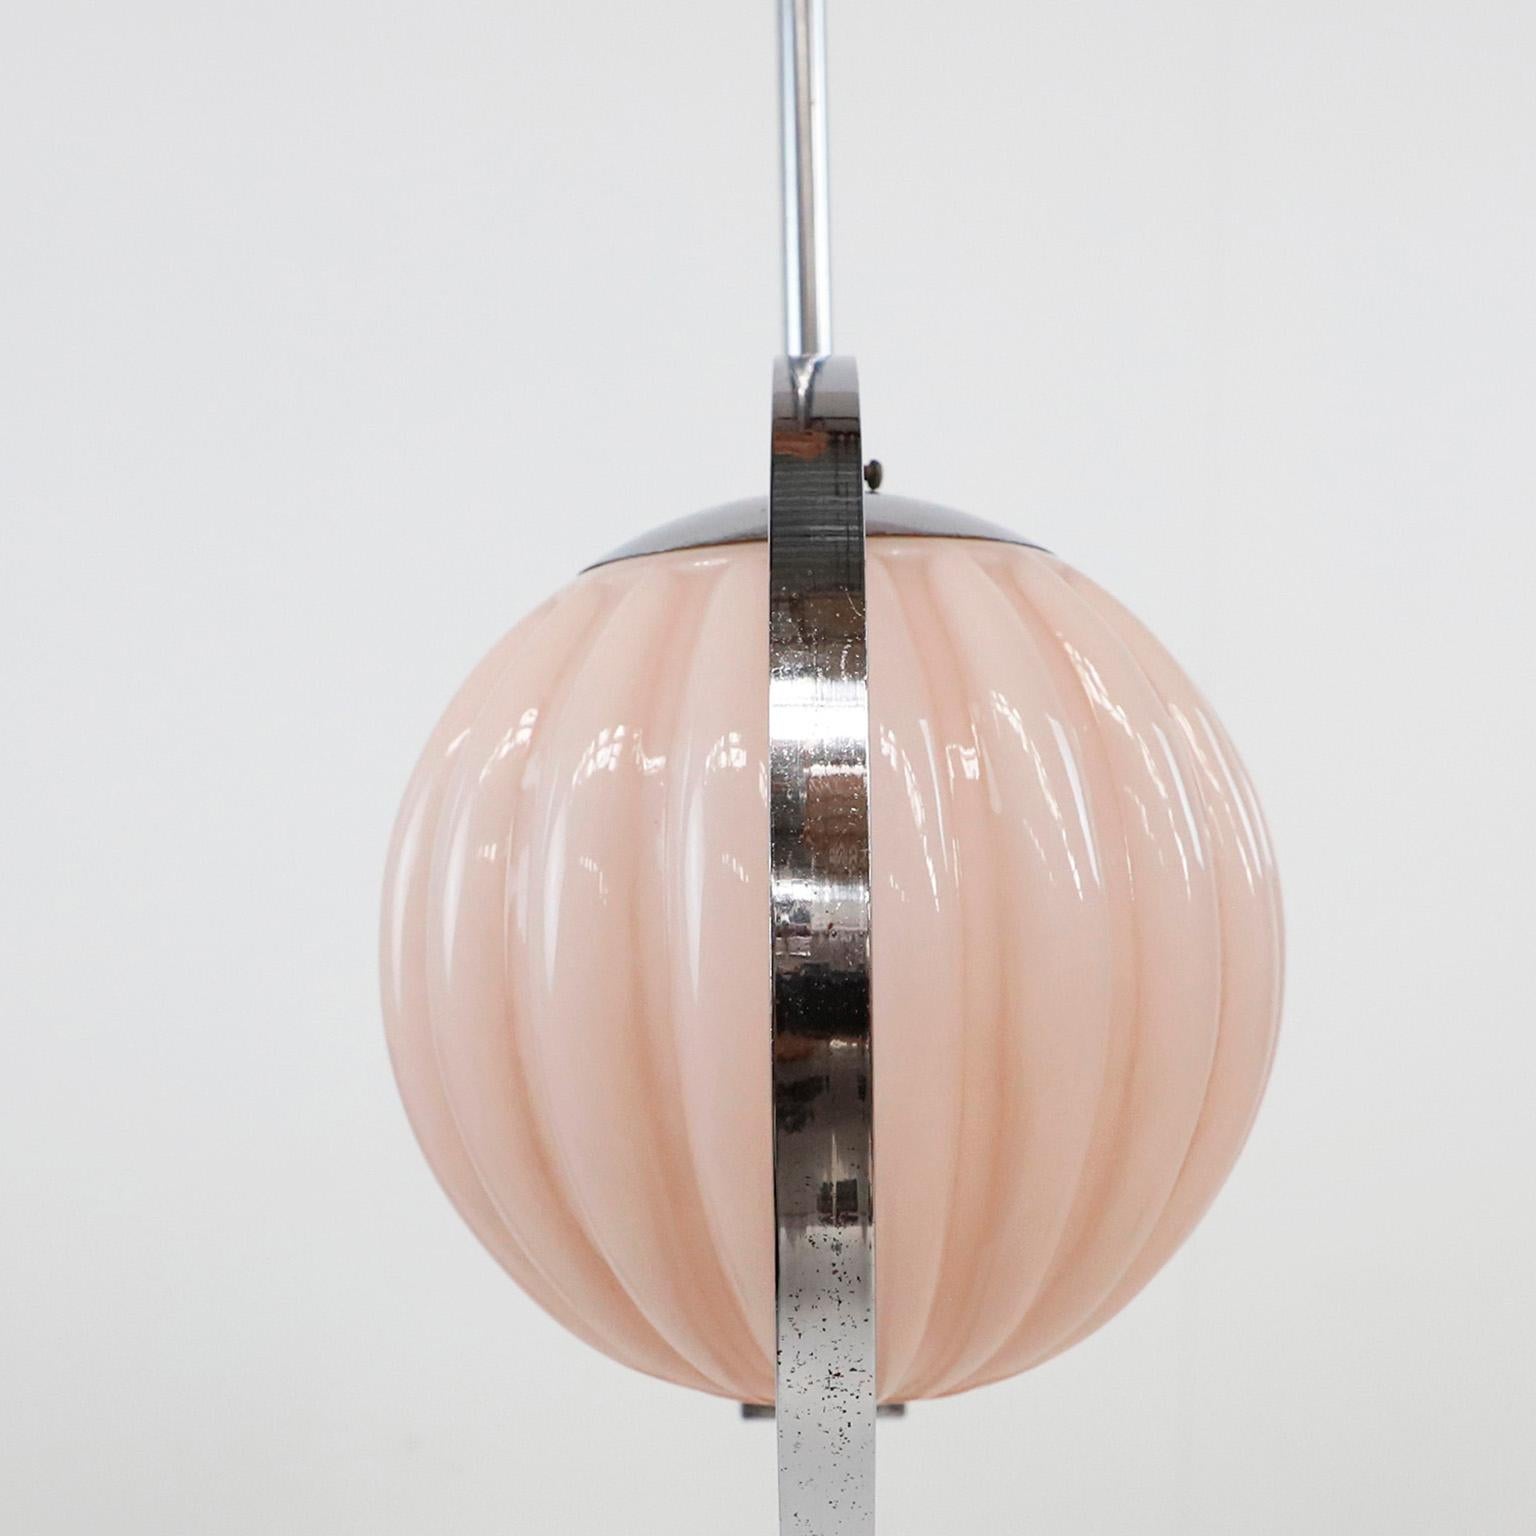 Circa 1930. We offer this French Art Deco Chandelier splendid chromium-plated chandelier / ceiling light features two pink globe glass light shades.